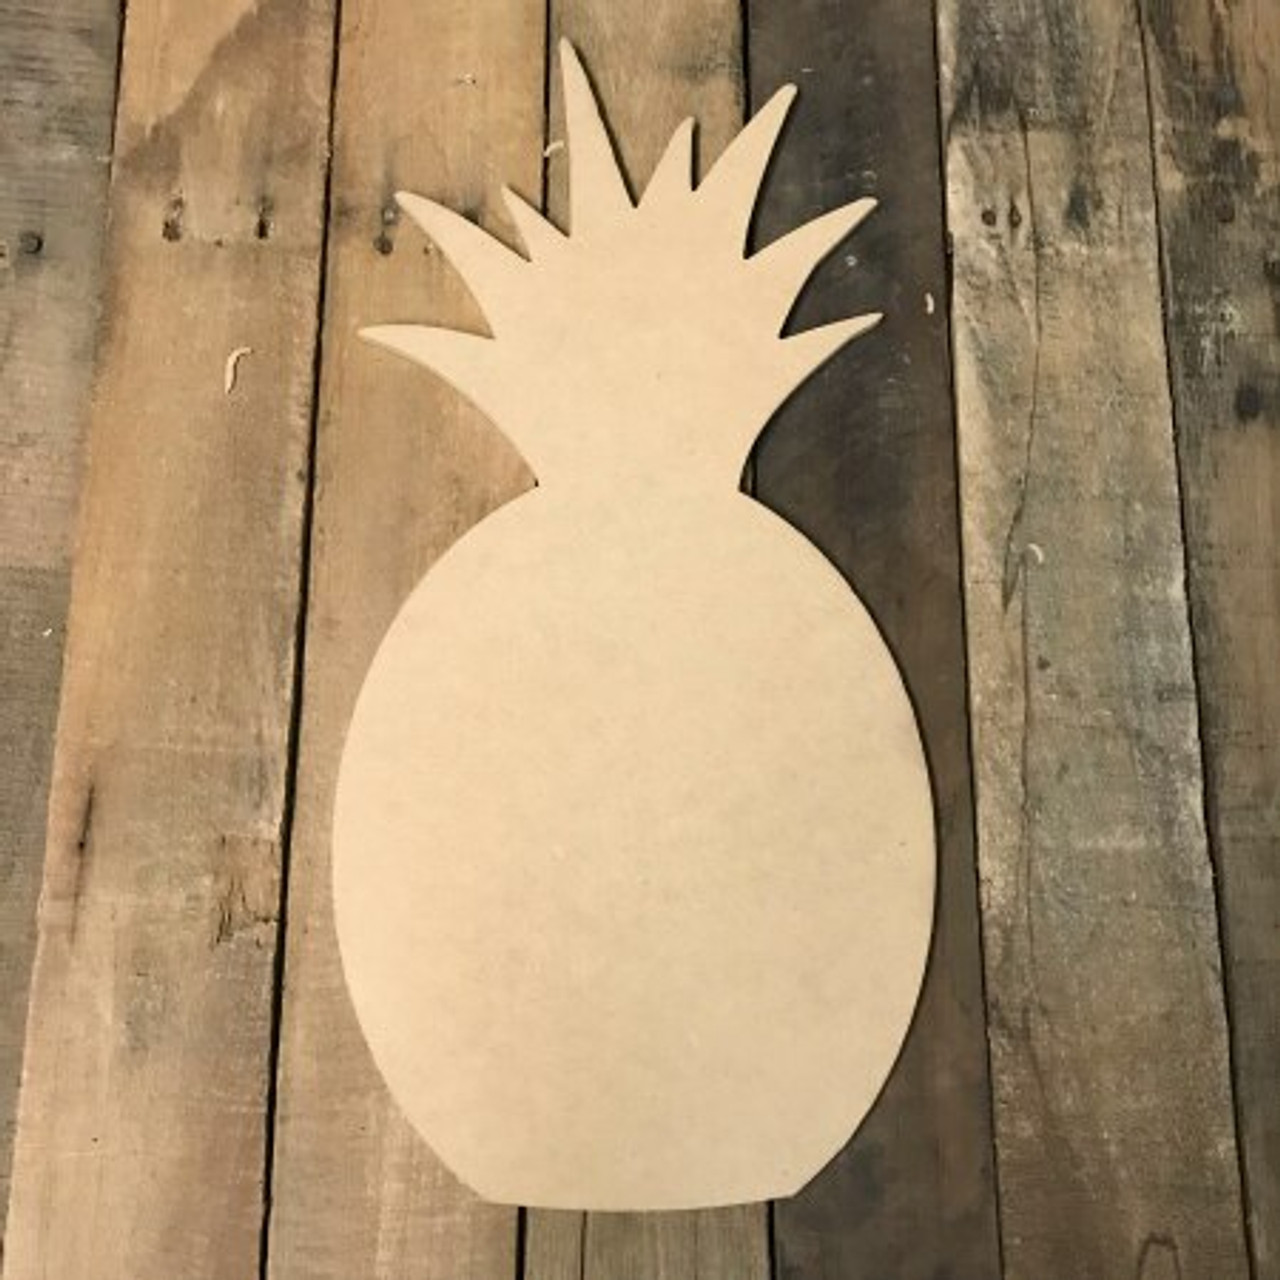 https://cdn11.bigcommerce.com/s-srux282/images/stencil/1280x1280/products/9091/42456/Wooden_Pineapple_Paintable_Shape_MDF__47808.1612776470.jpg?c=2?imbypass=on